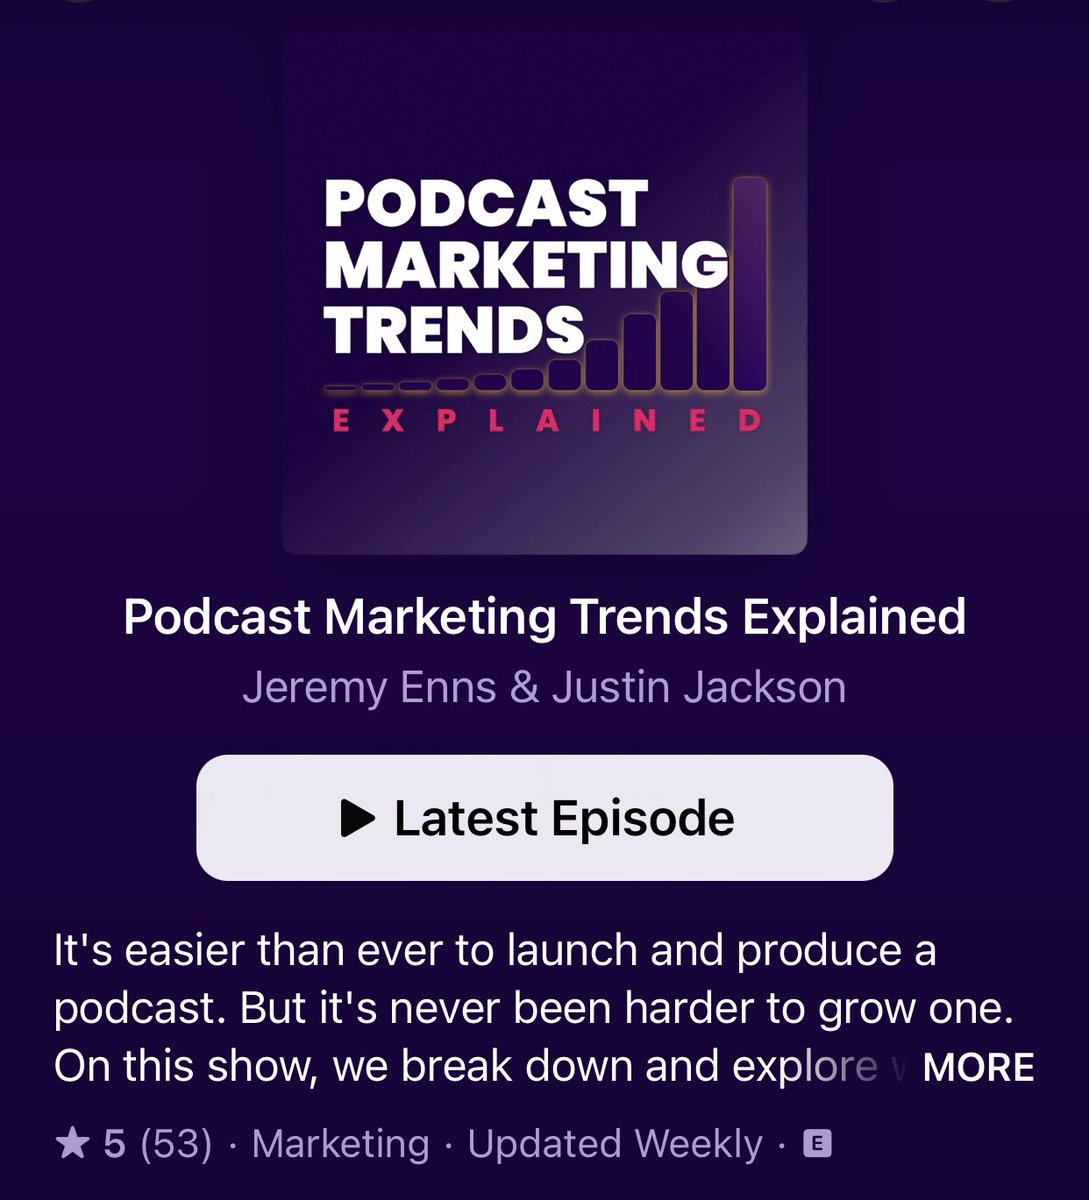 Got a recommendation for you. Podcast Marketing Trends Explained has quickly become one of my favorite podcasts. @iamjeremyenns and @mijustin do a great job highlighting the little things that can make a huge difference in the success of a podcast.